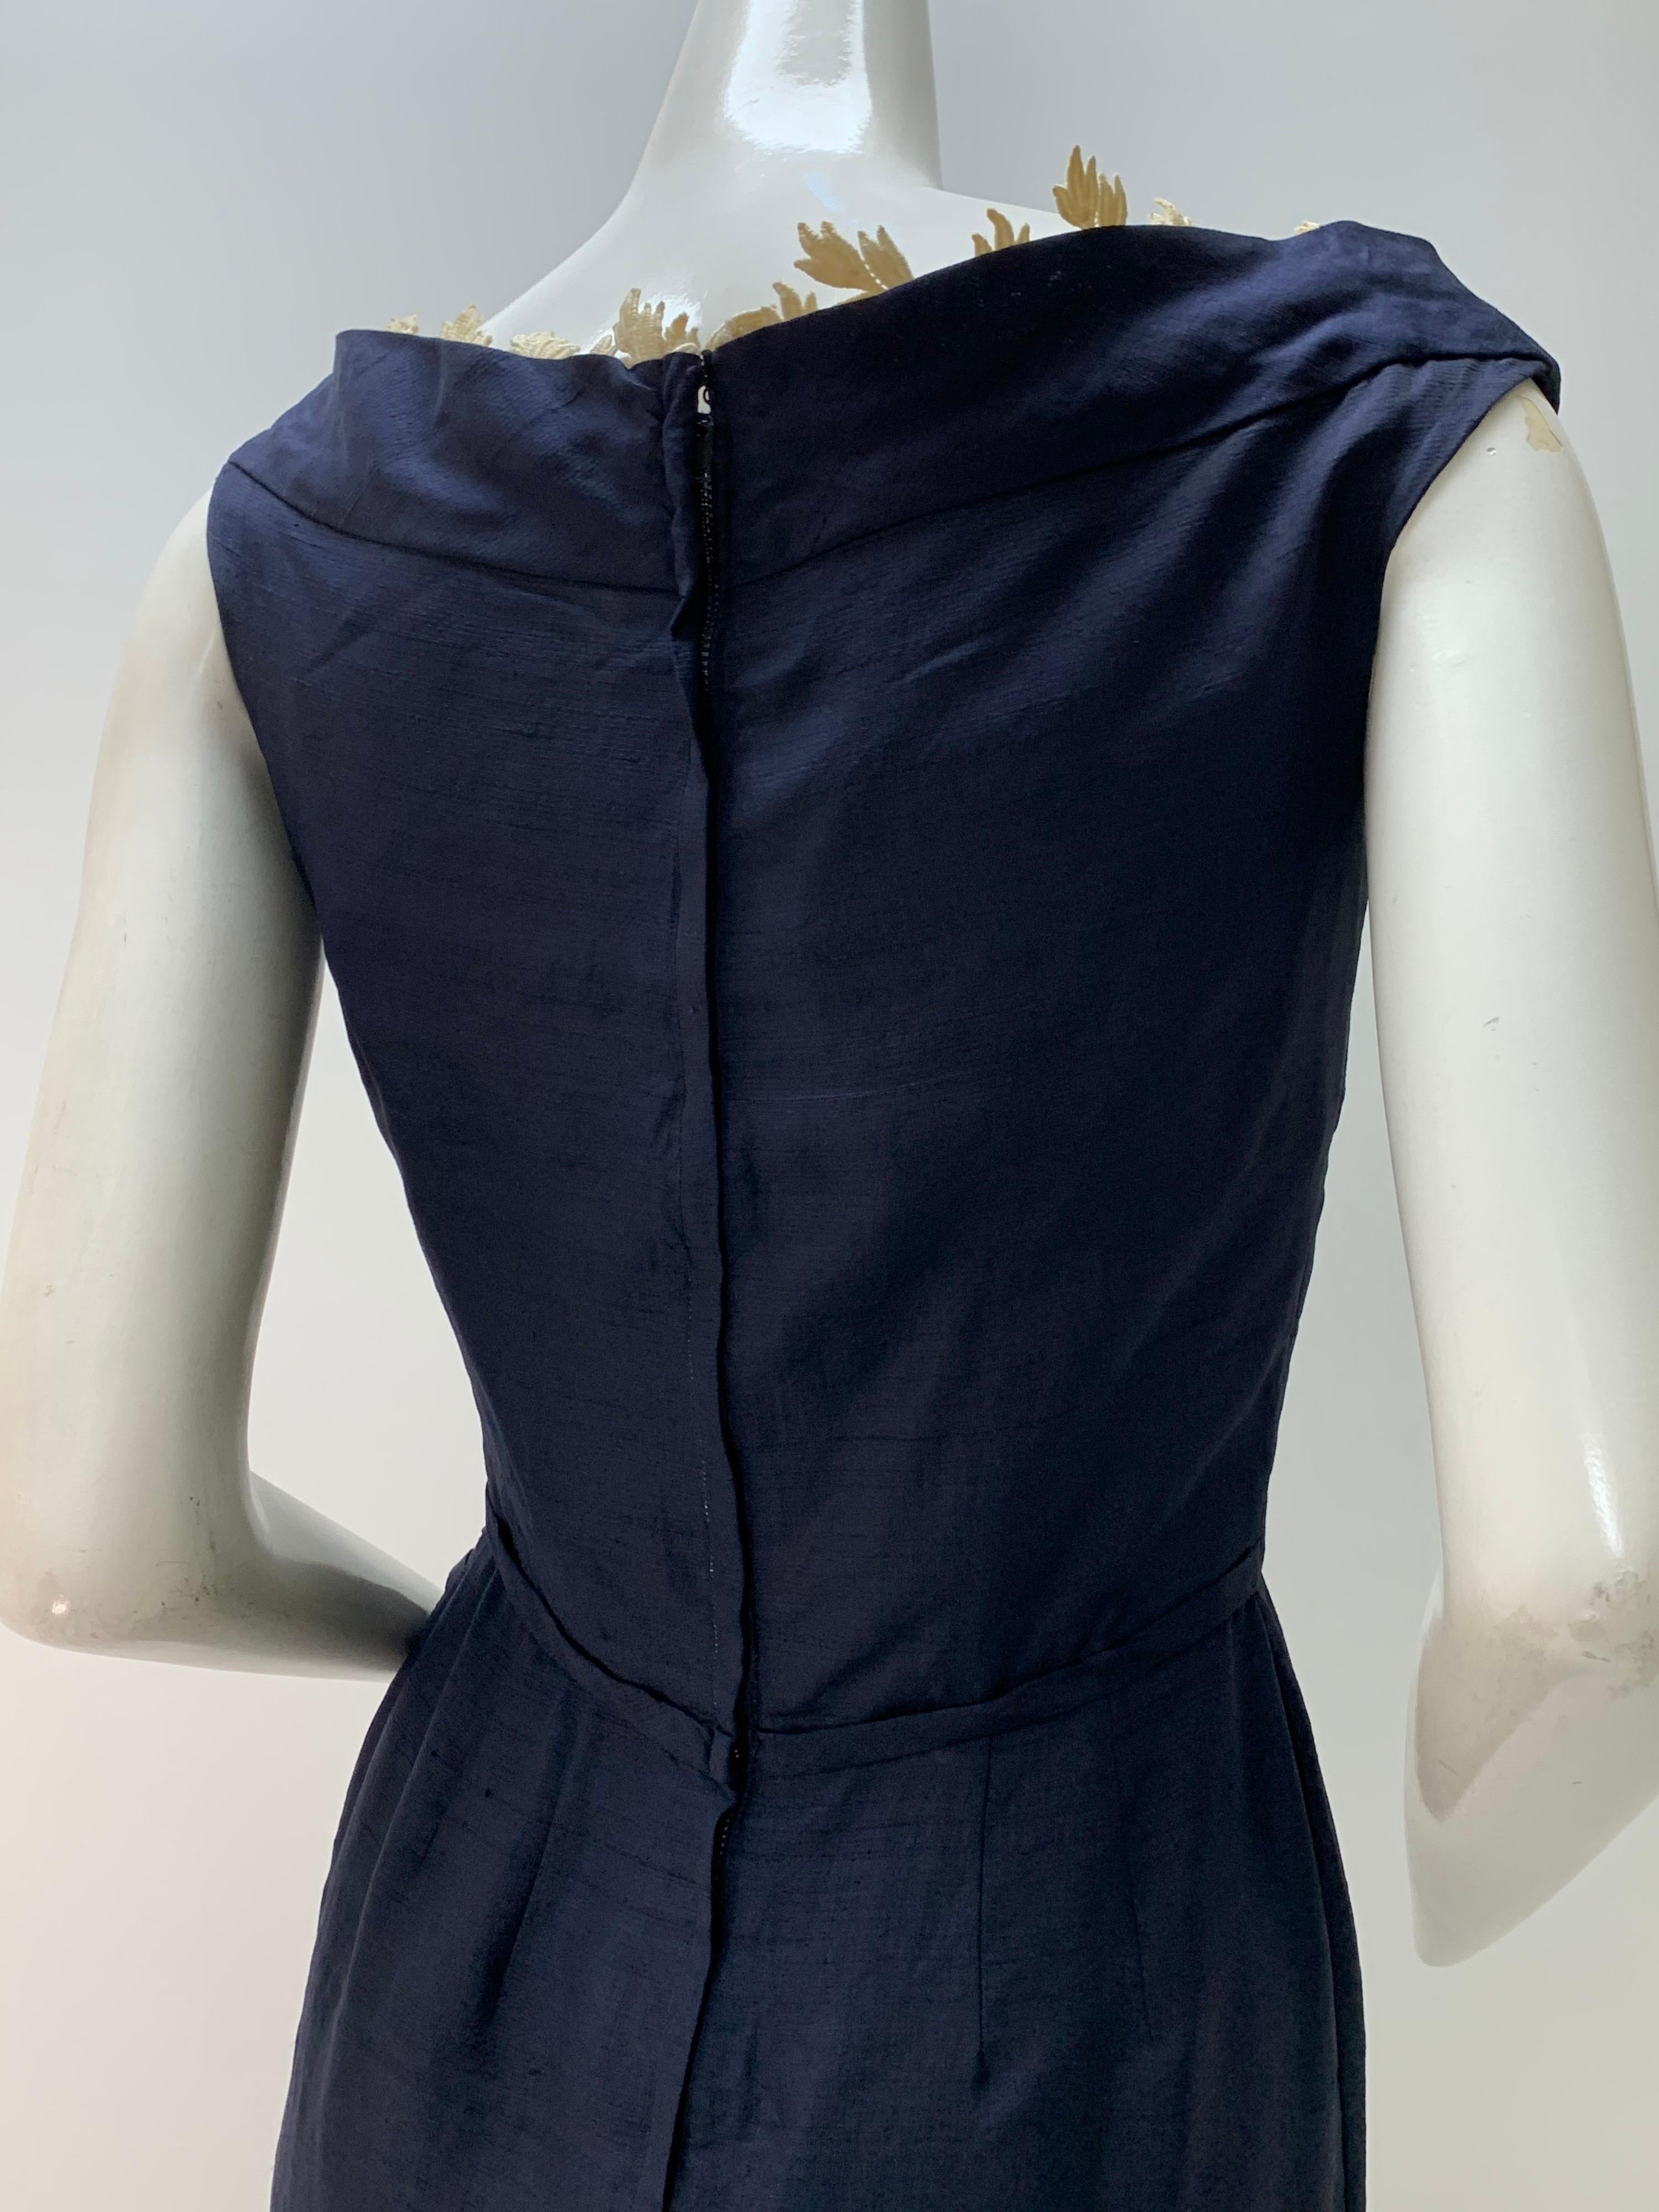 1950s Ceil Chapman Navy Fitted Spring Sheath Dress w/ Lace Décolletage Neckline For Sale 3